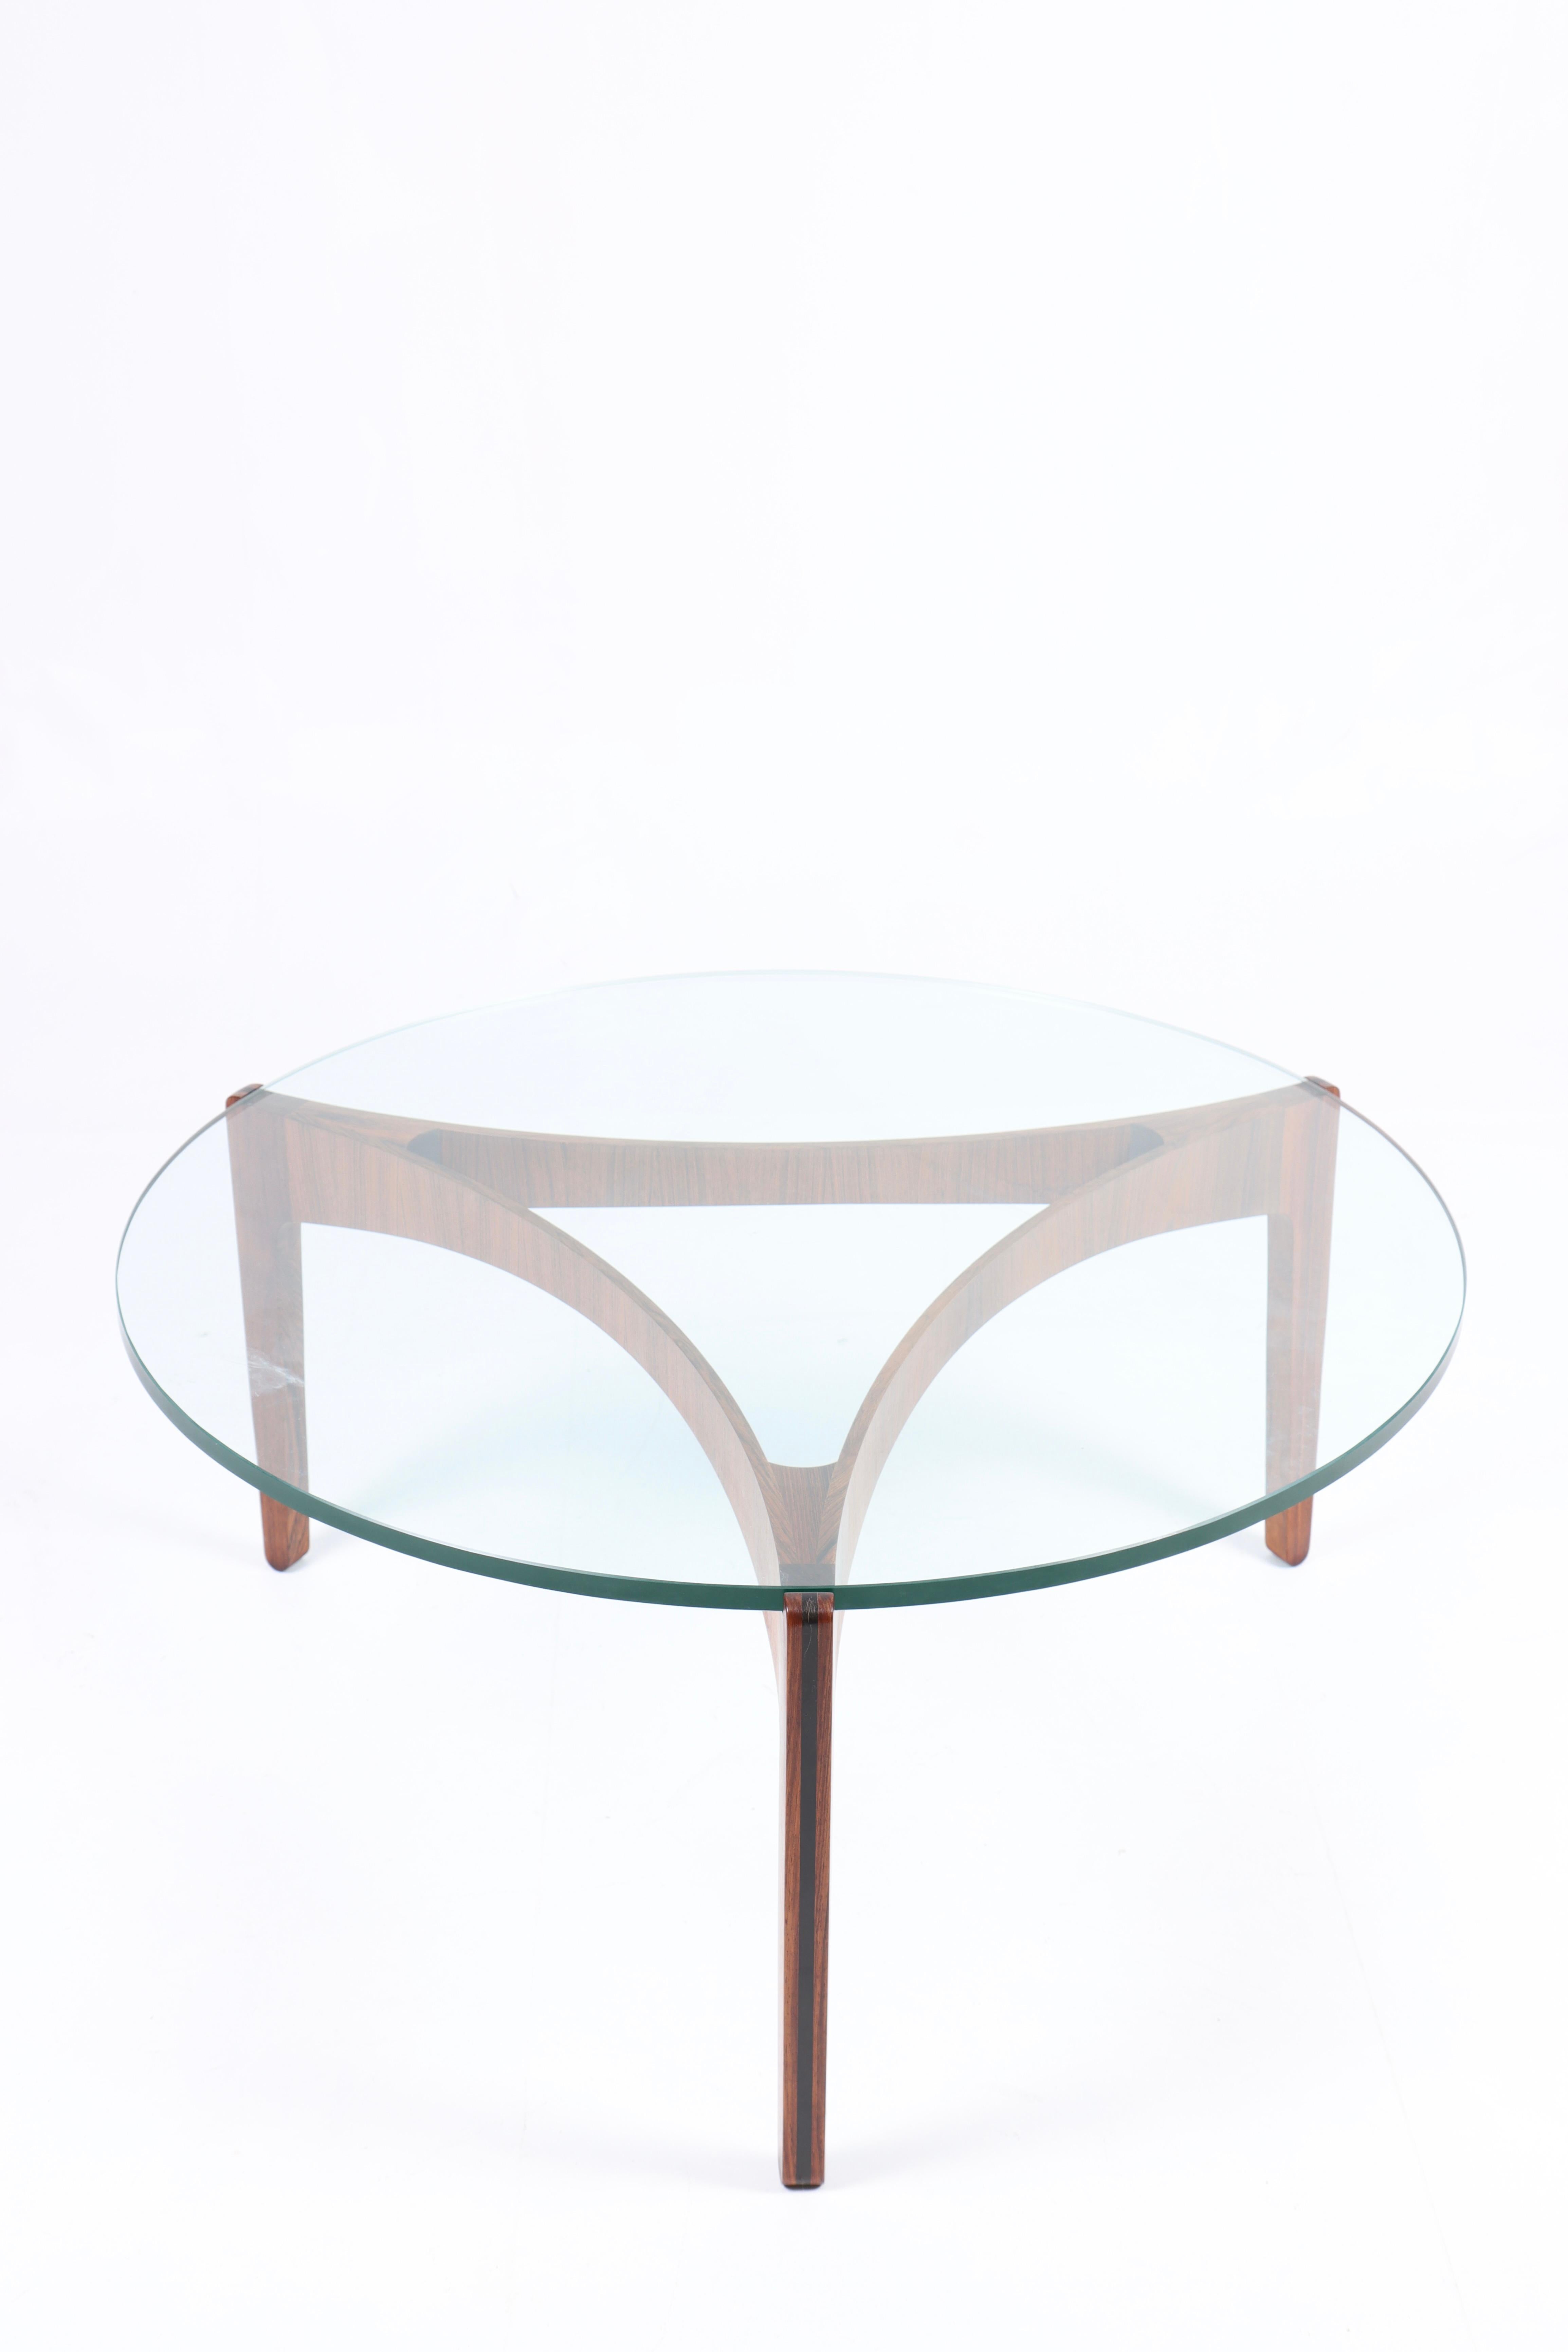 Low table - Rosewood frame with a top in glass - Designed by Svend Ellekær and made by Christian Linnebjerg Denmark in the 1960s - great condition.